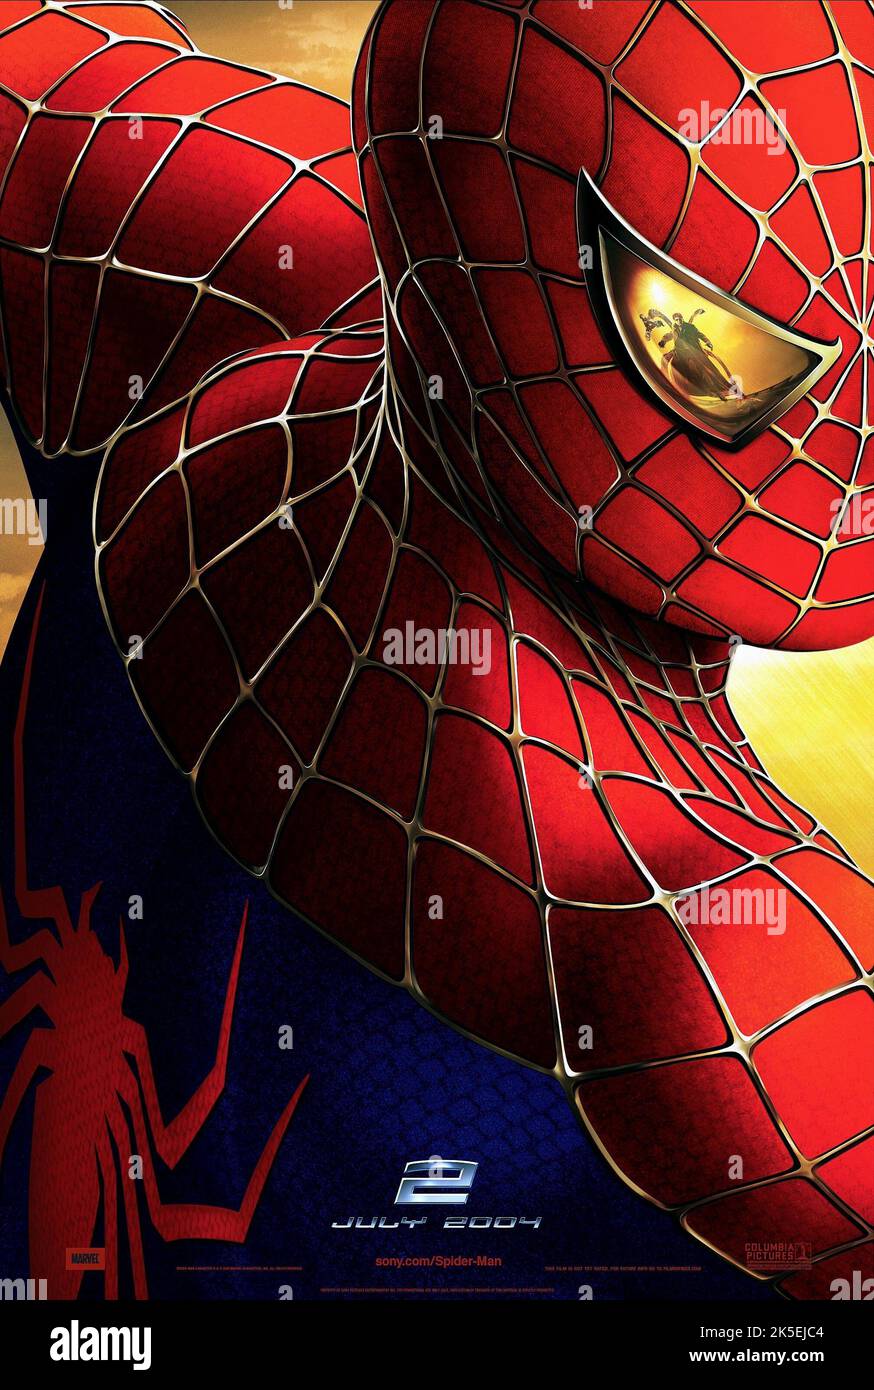 TOBEY MAGUIRE, Alfred Molina POSTER, SPIDER-MAN 2, 2004 Banque D'Images